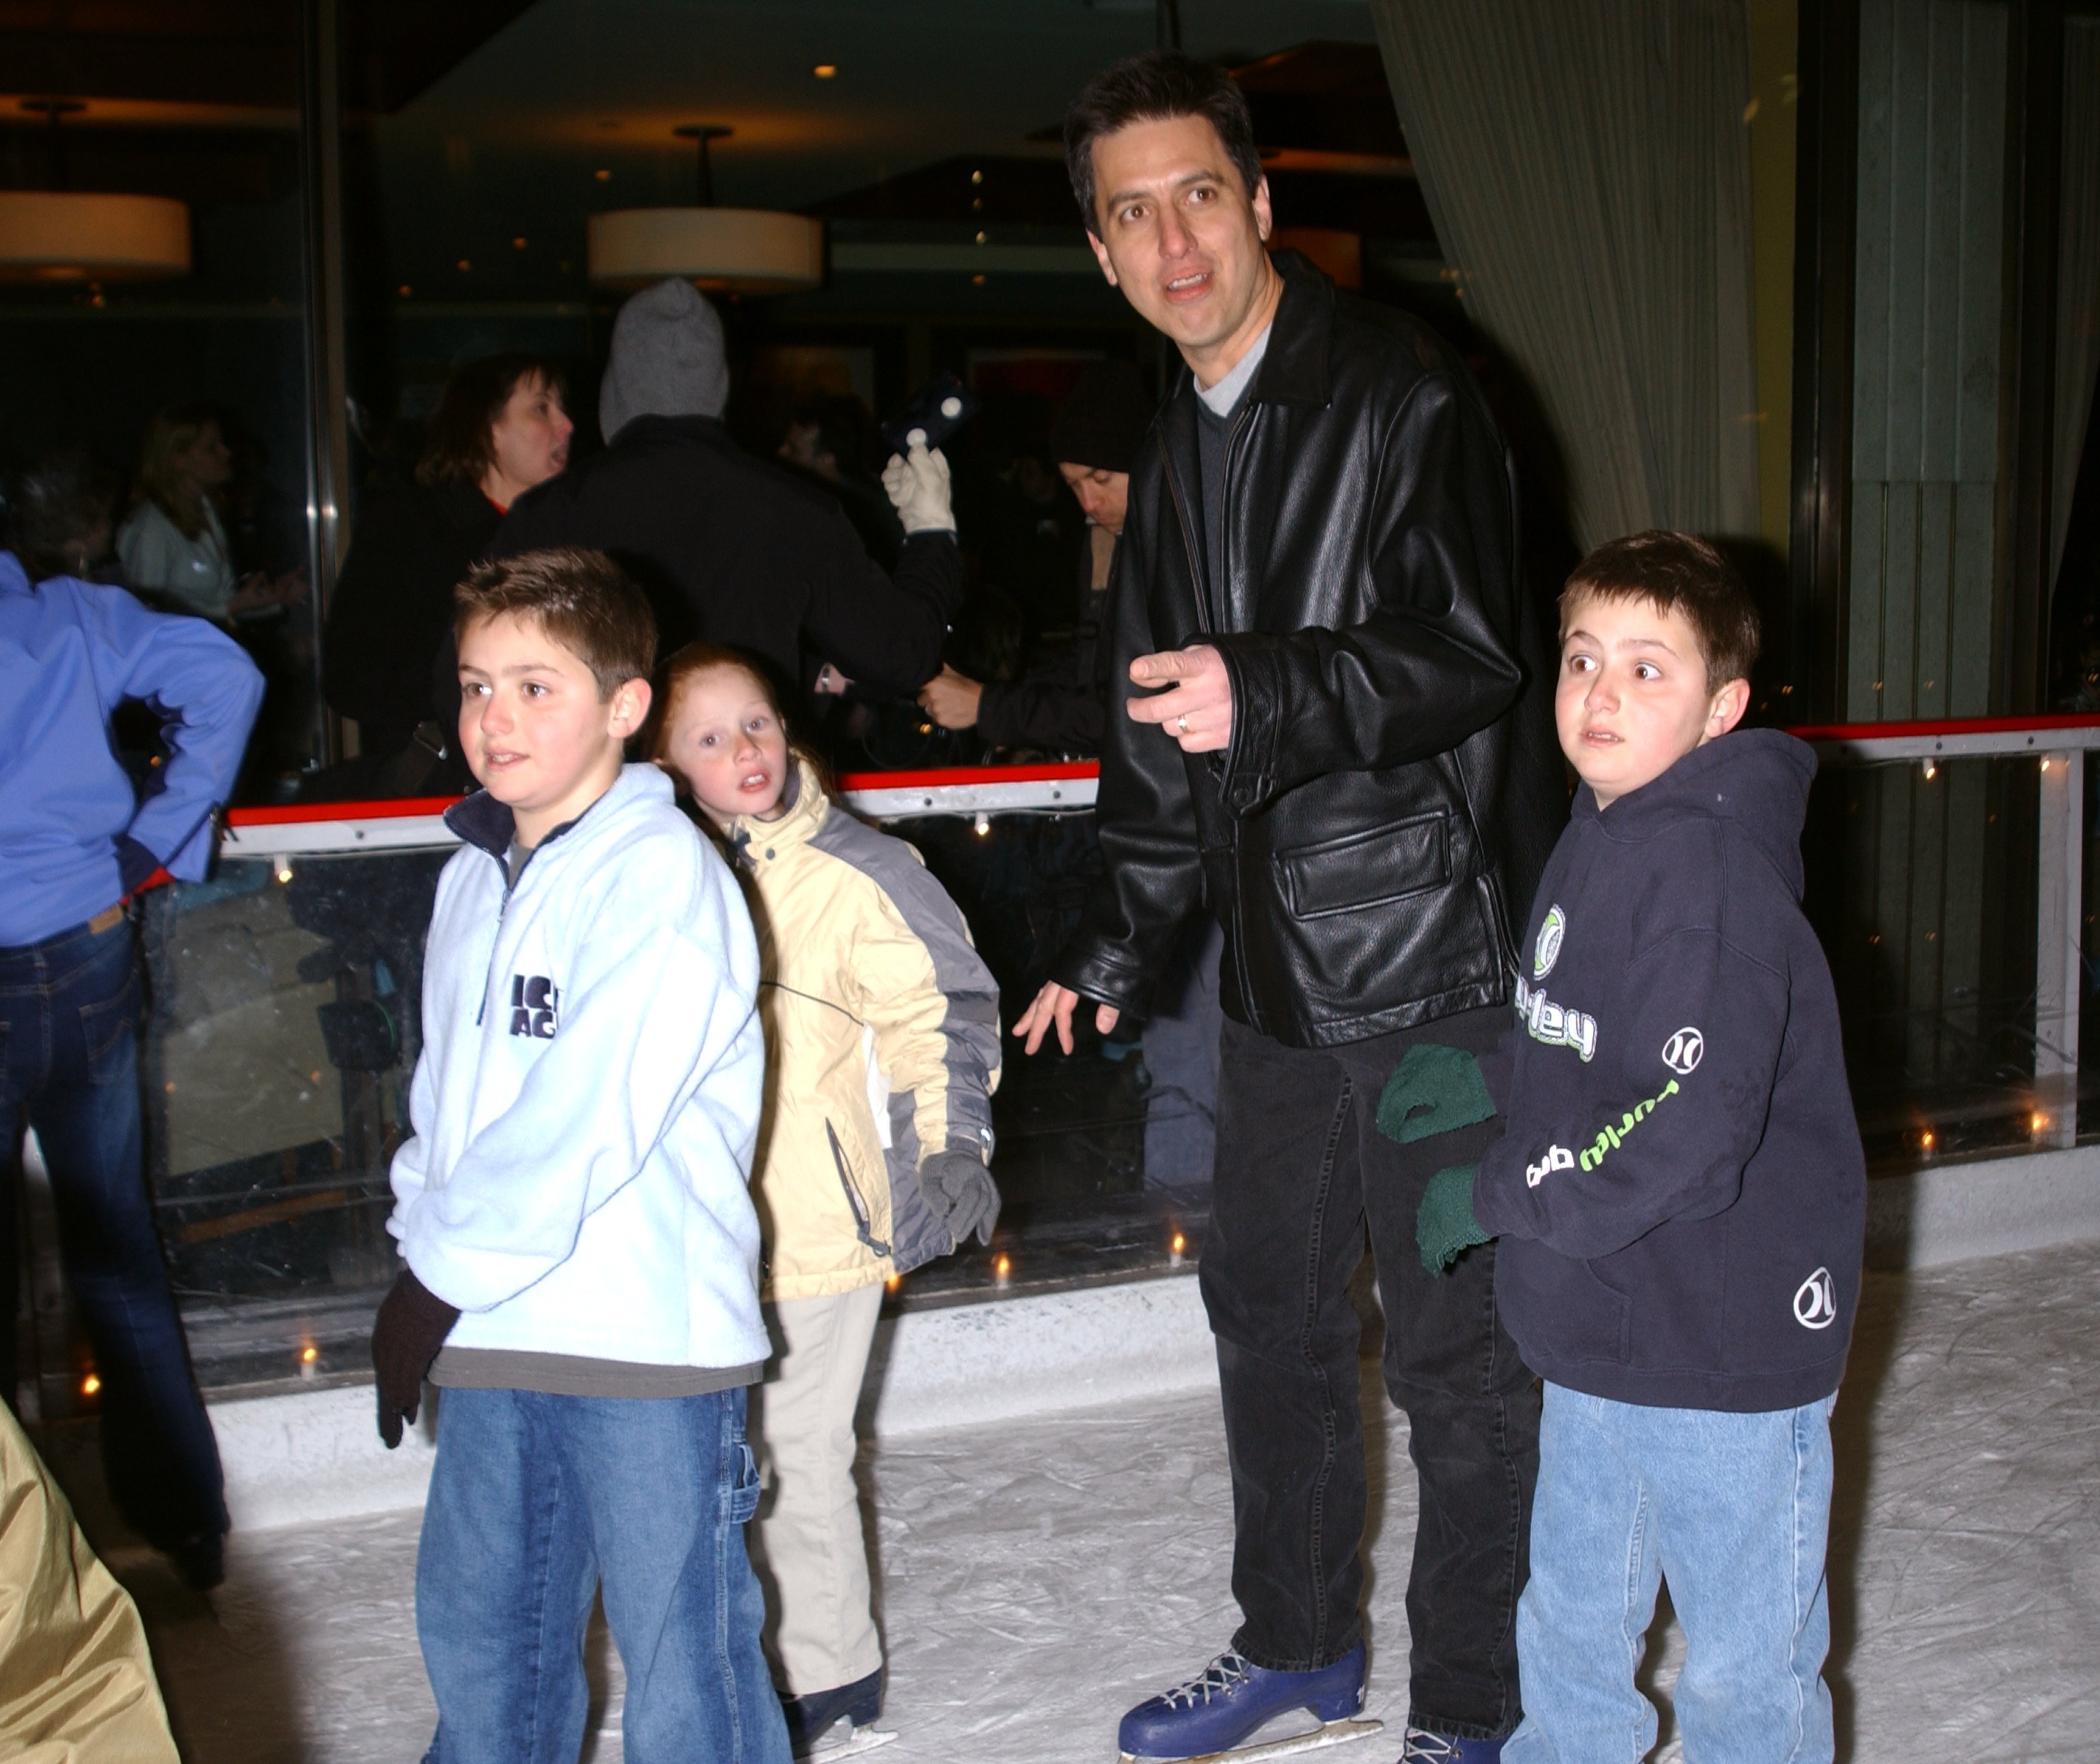 Ray Romano takes to the ice at Rockefeller Center rink with sons Matt and Gregory. Celebs turned out to celebrate the premiere of the movie "Ice Age."  | Source: Getty Images